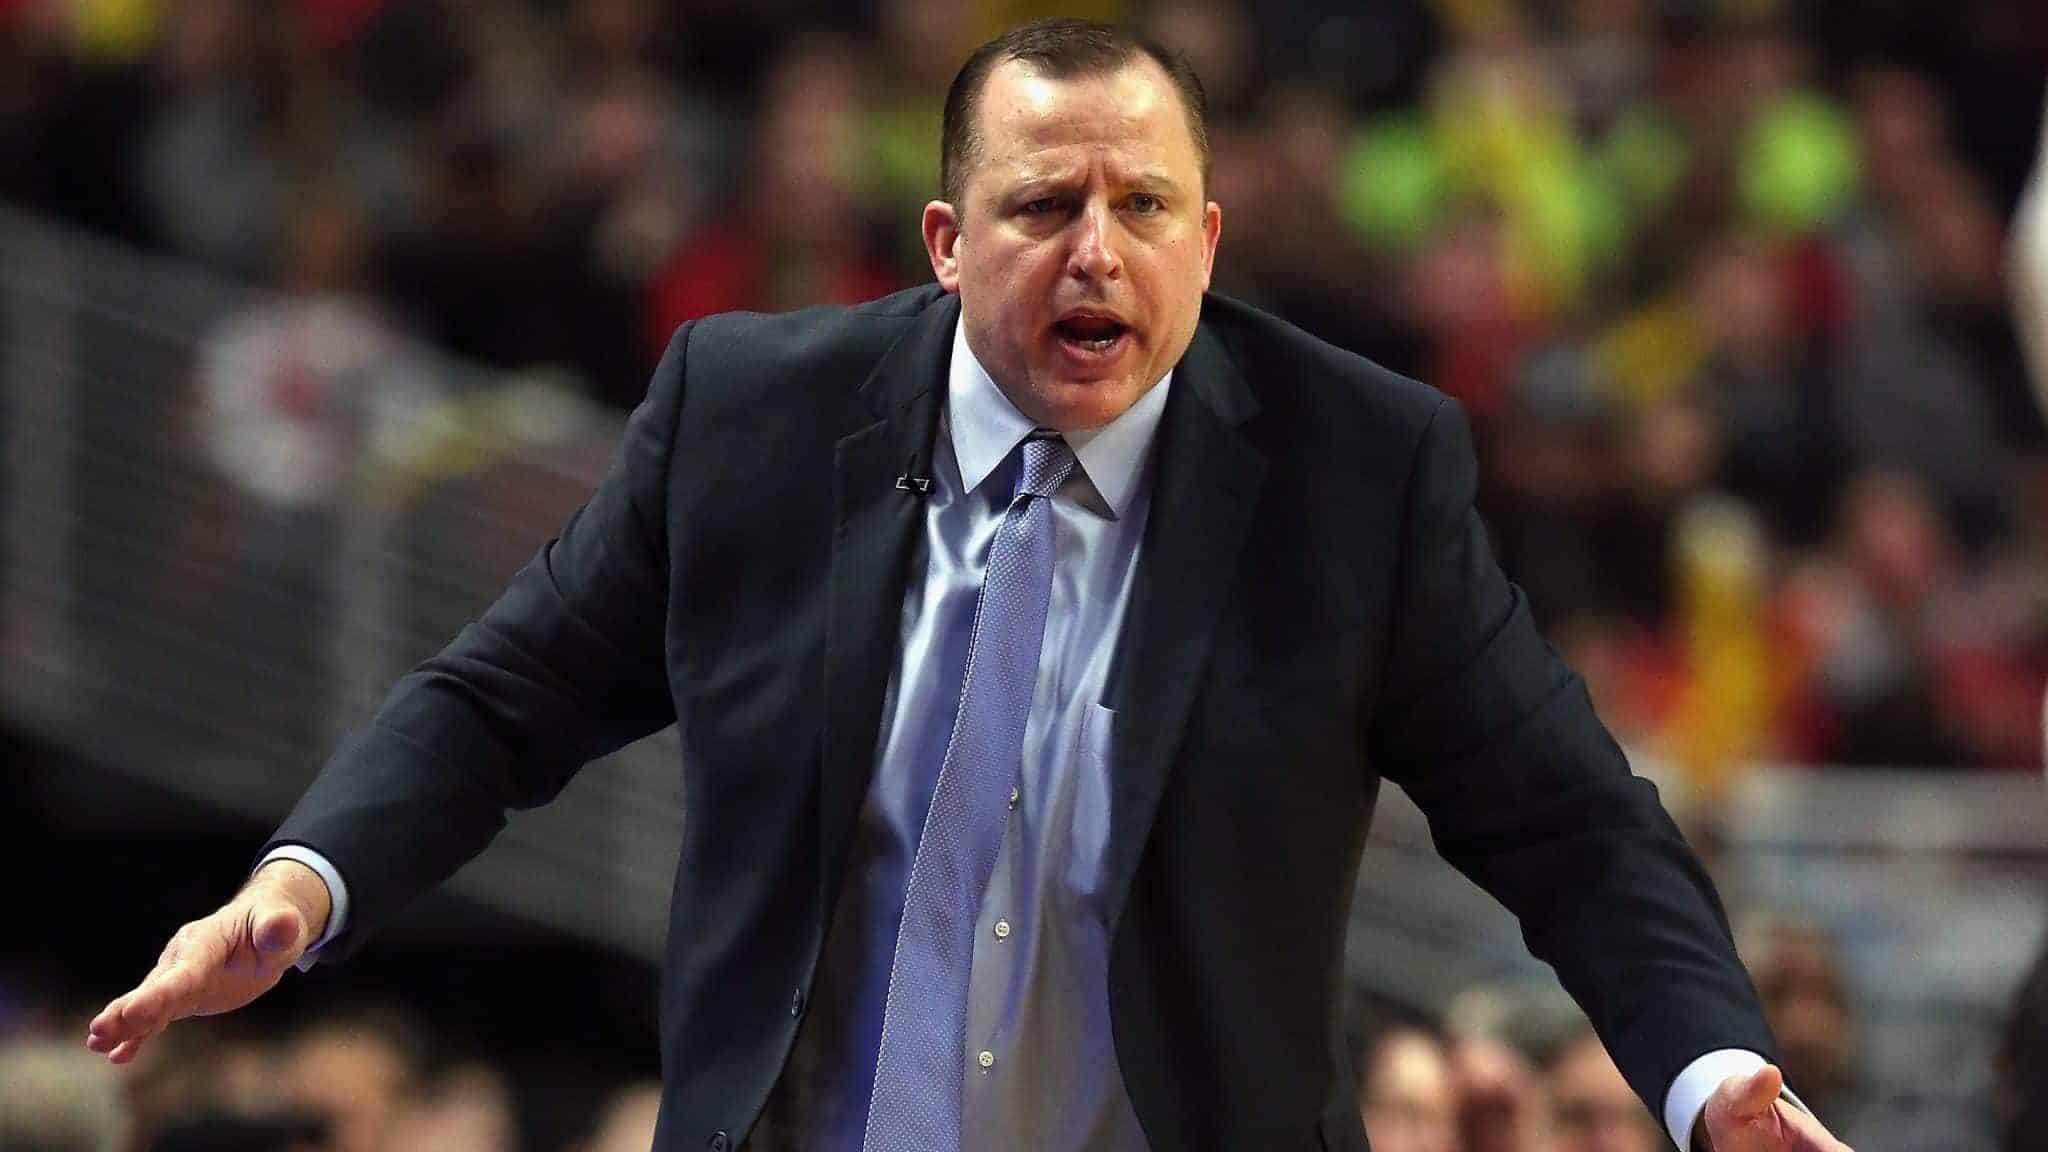 CHICAGO, IL - MARCH 01: Head coach Tom Thibodeau of the Chicago Bulls reacts to a call during a game against the los Angeles Wizards at the United Center on March 1, 2015 in Chicago, Illinois. The Clippers defeated the Bulls 96-86. NOTE TO USER: User expressly acknowledges and agrees that, by downloading and or using this photograph, User is consenting to the terms and conditions of the Getty Images License Agreement.